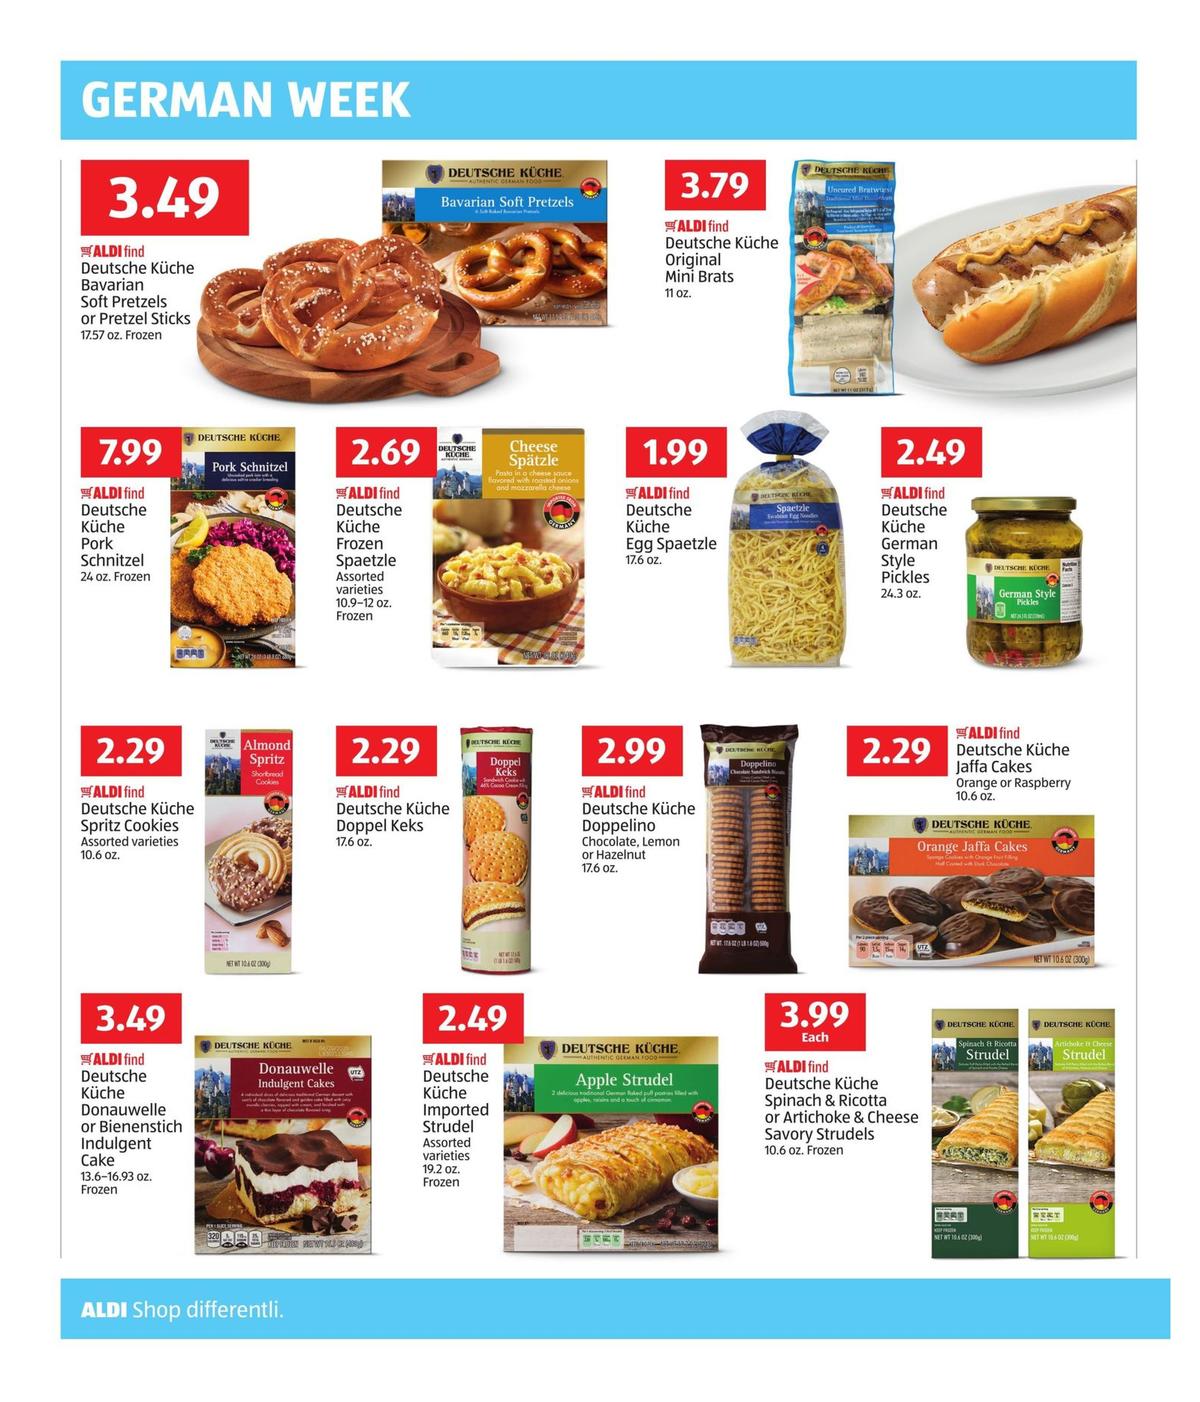 ALDI Weekly Ad from March 17